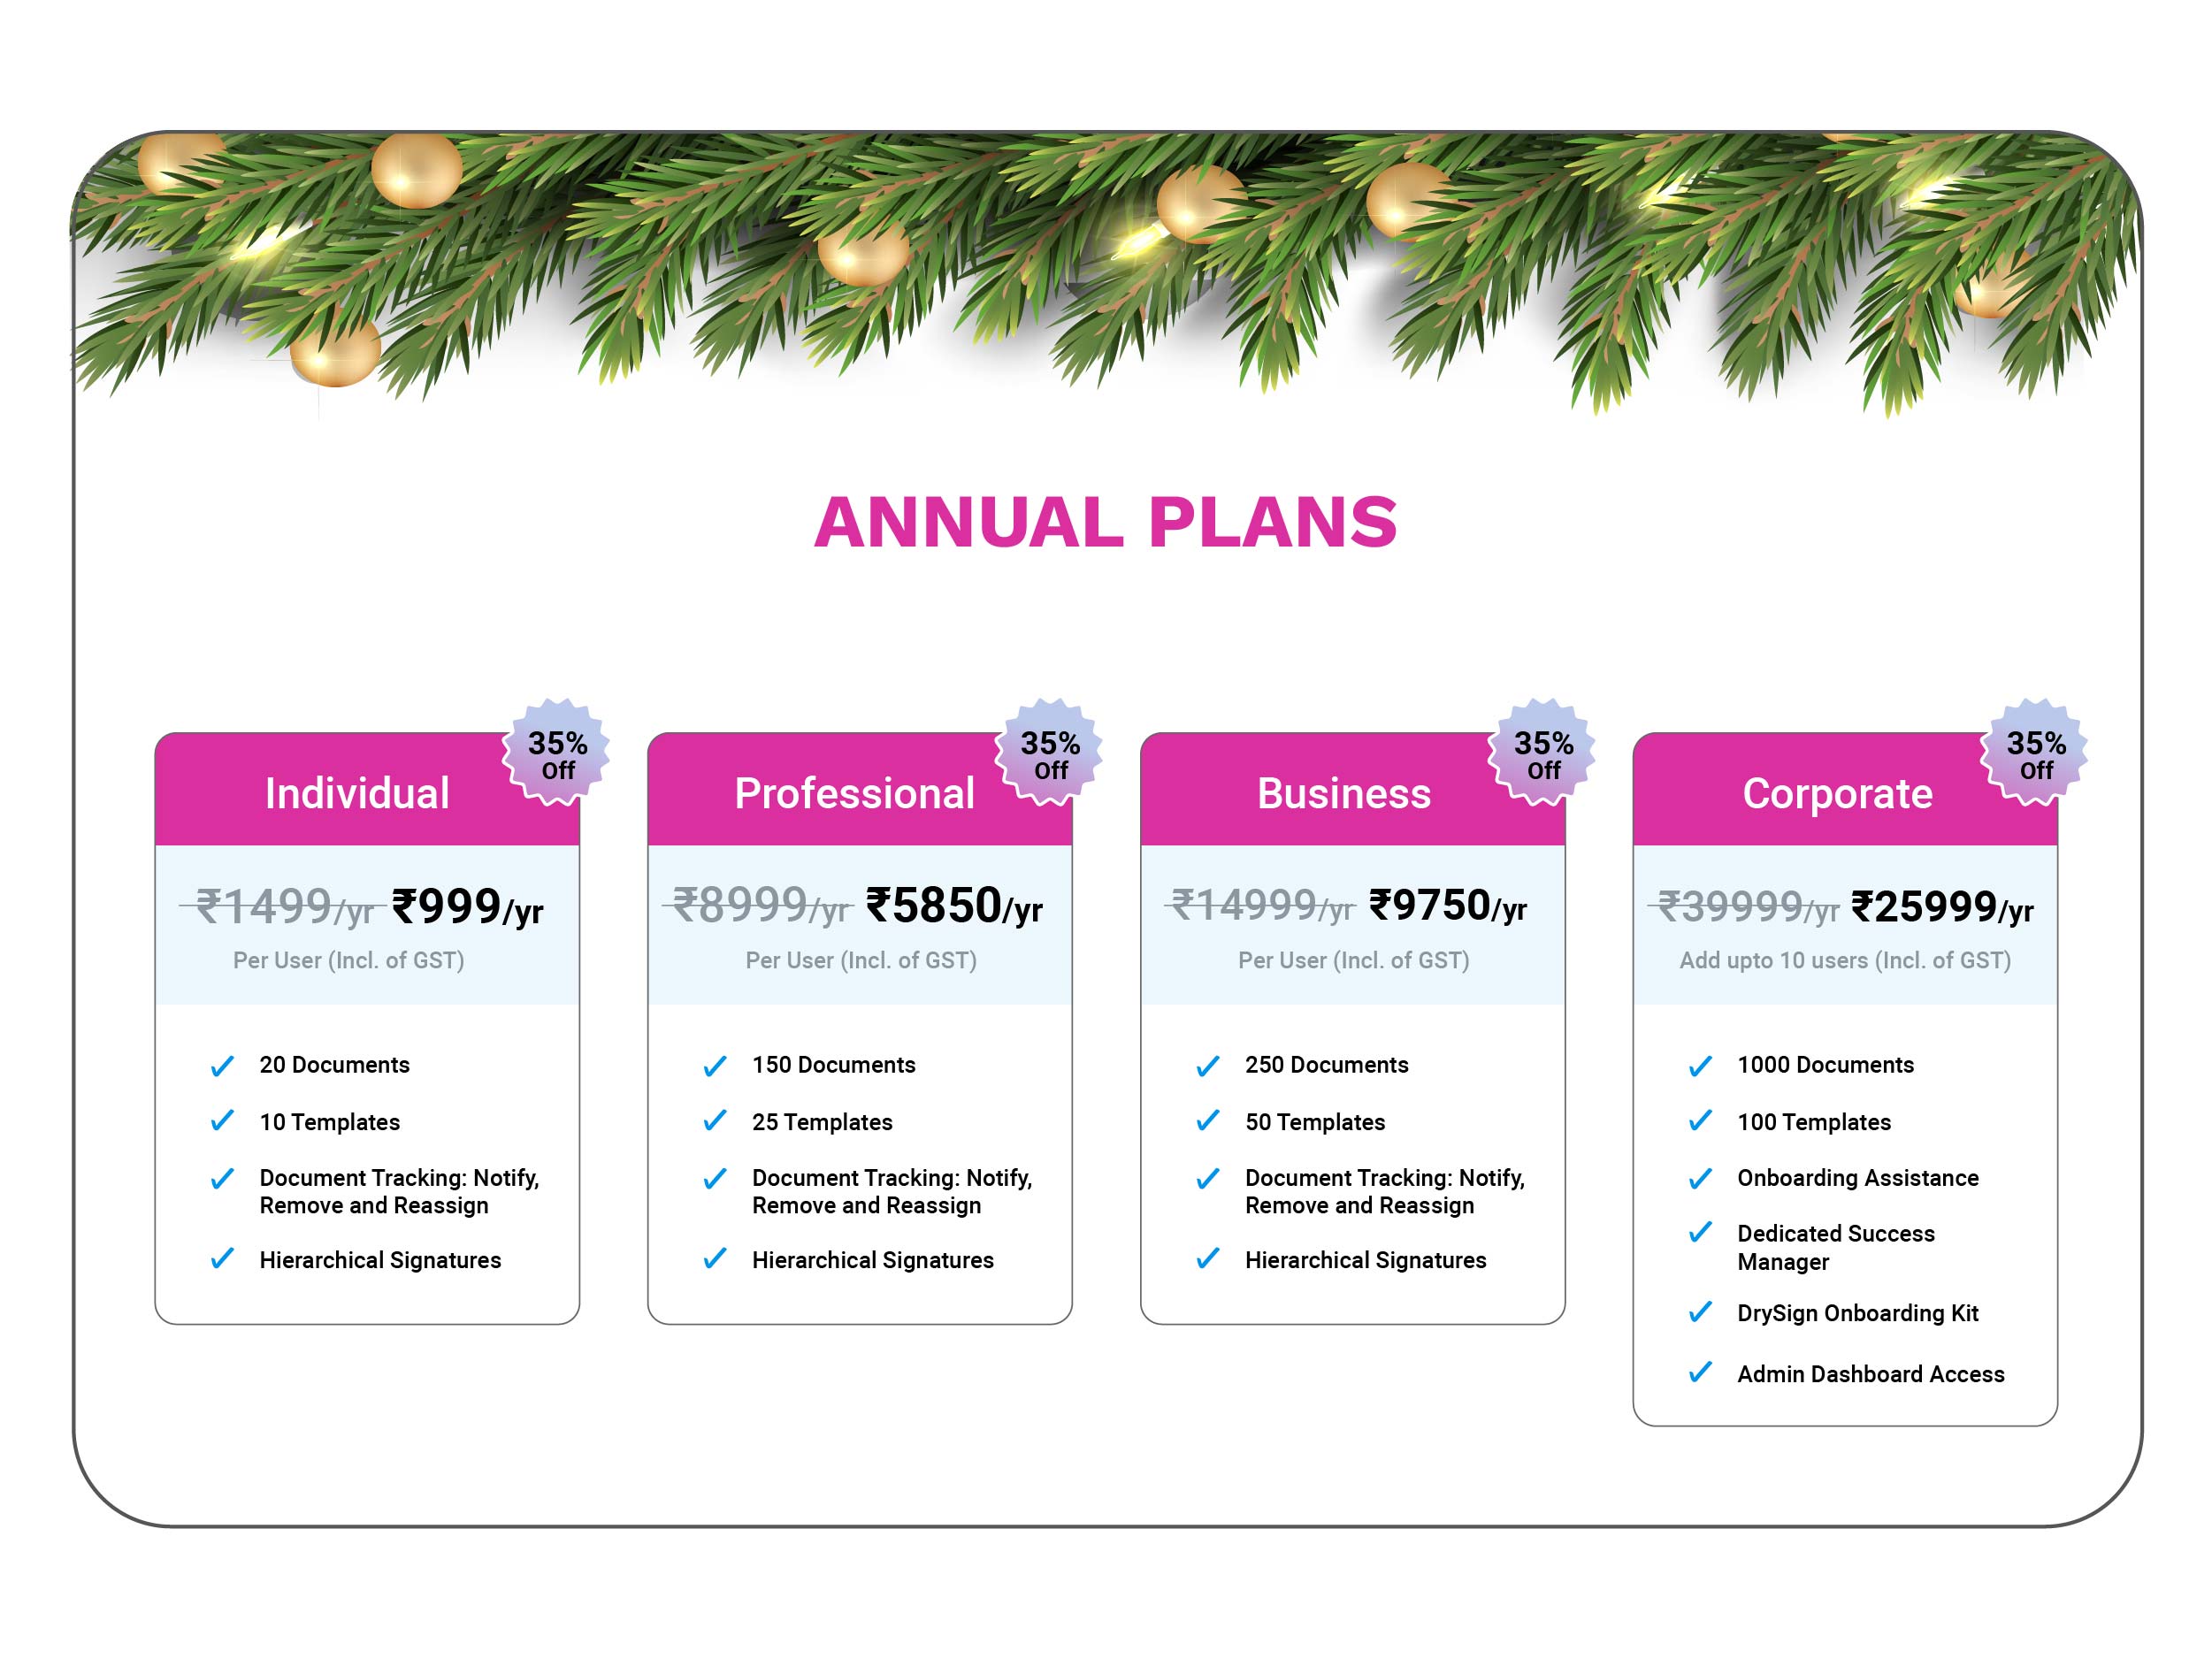 DrySign introduces 35% off on all Annual Plans!